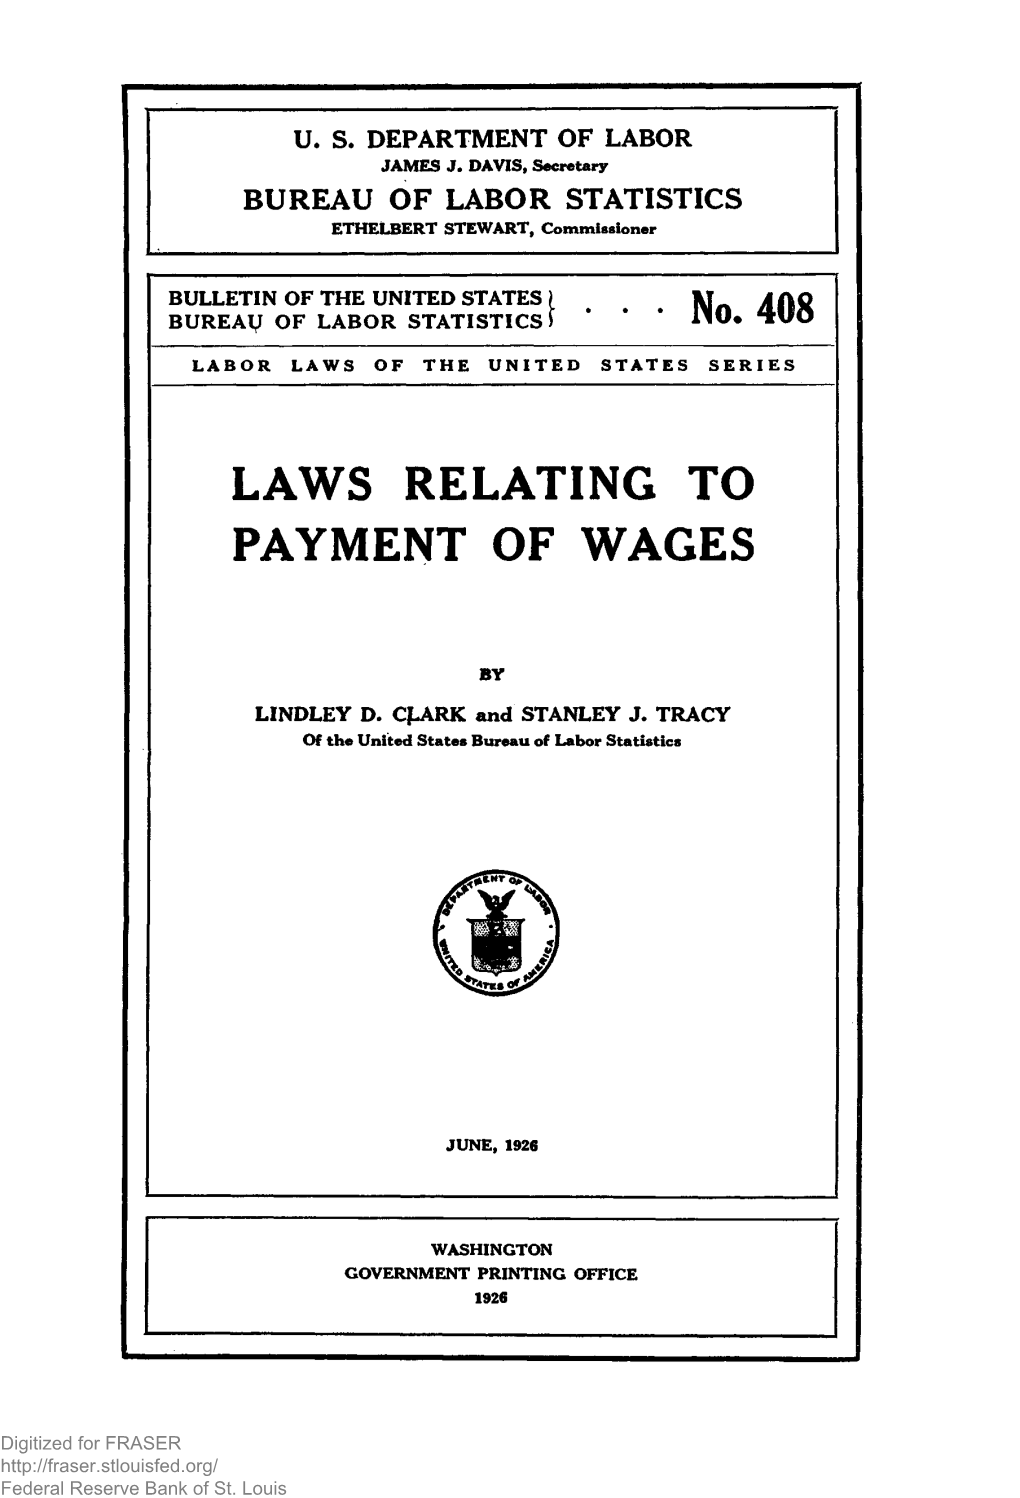 Laws Relating to Payment of Wages